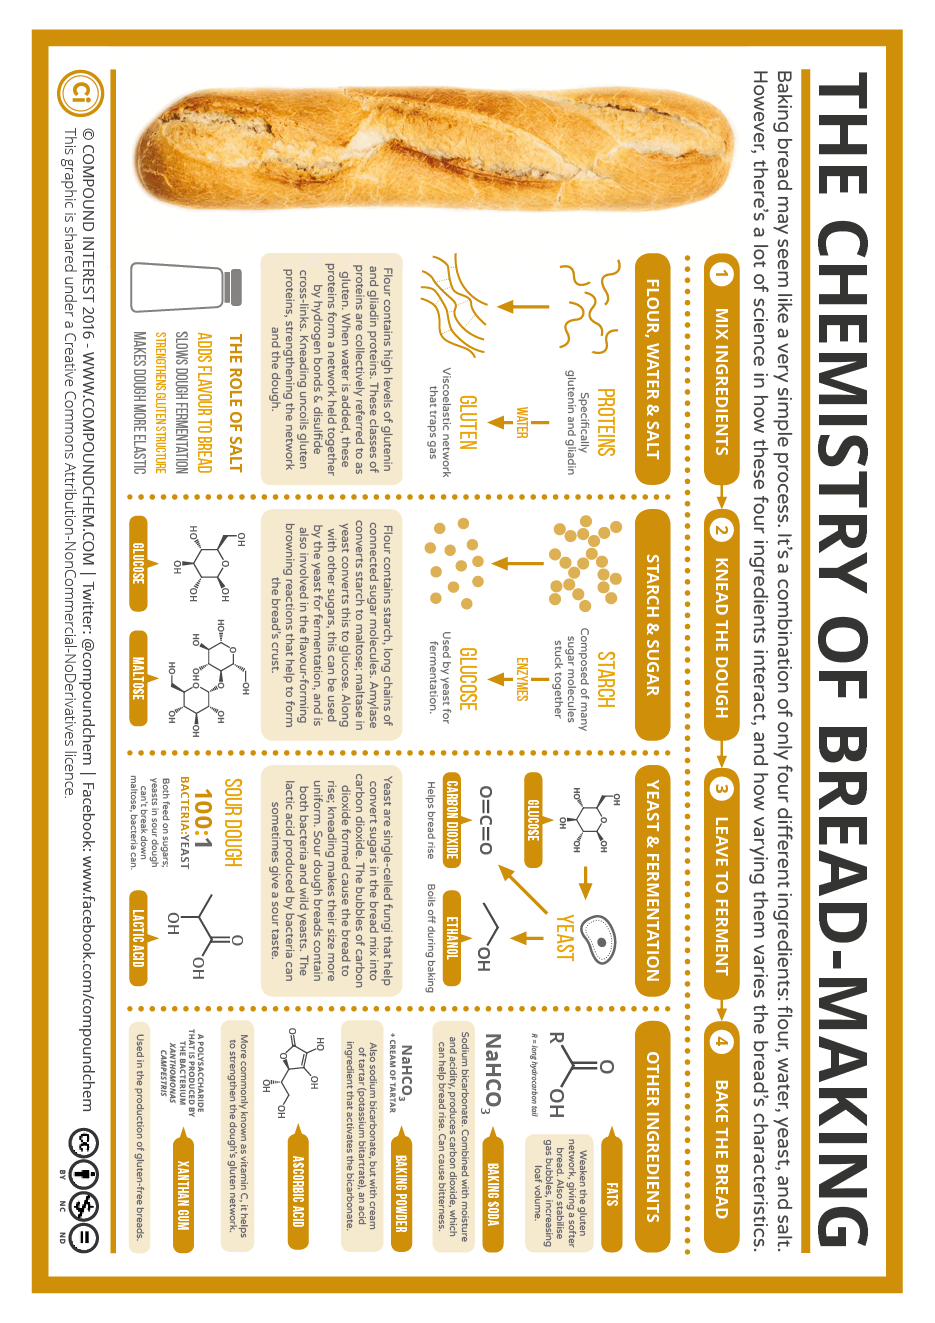 ChemistryOfBreadHandout.png